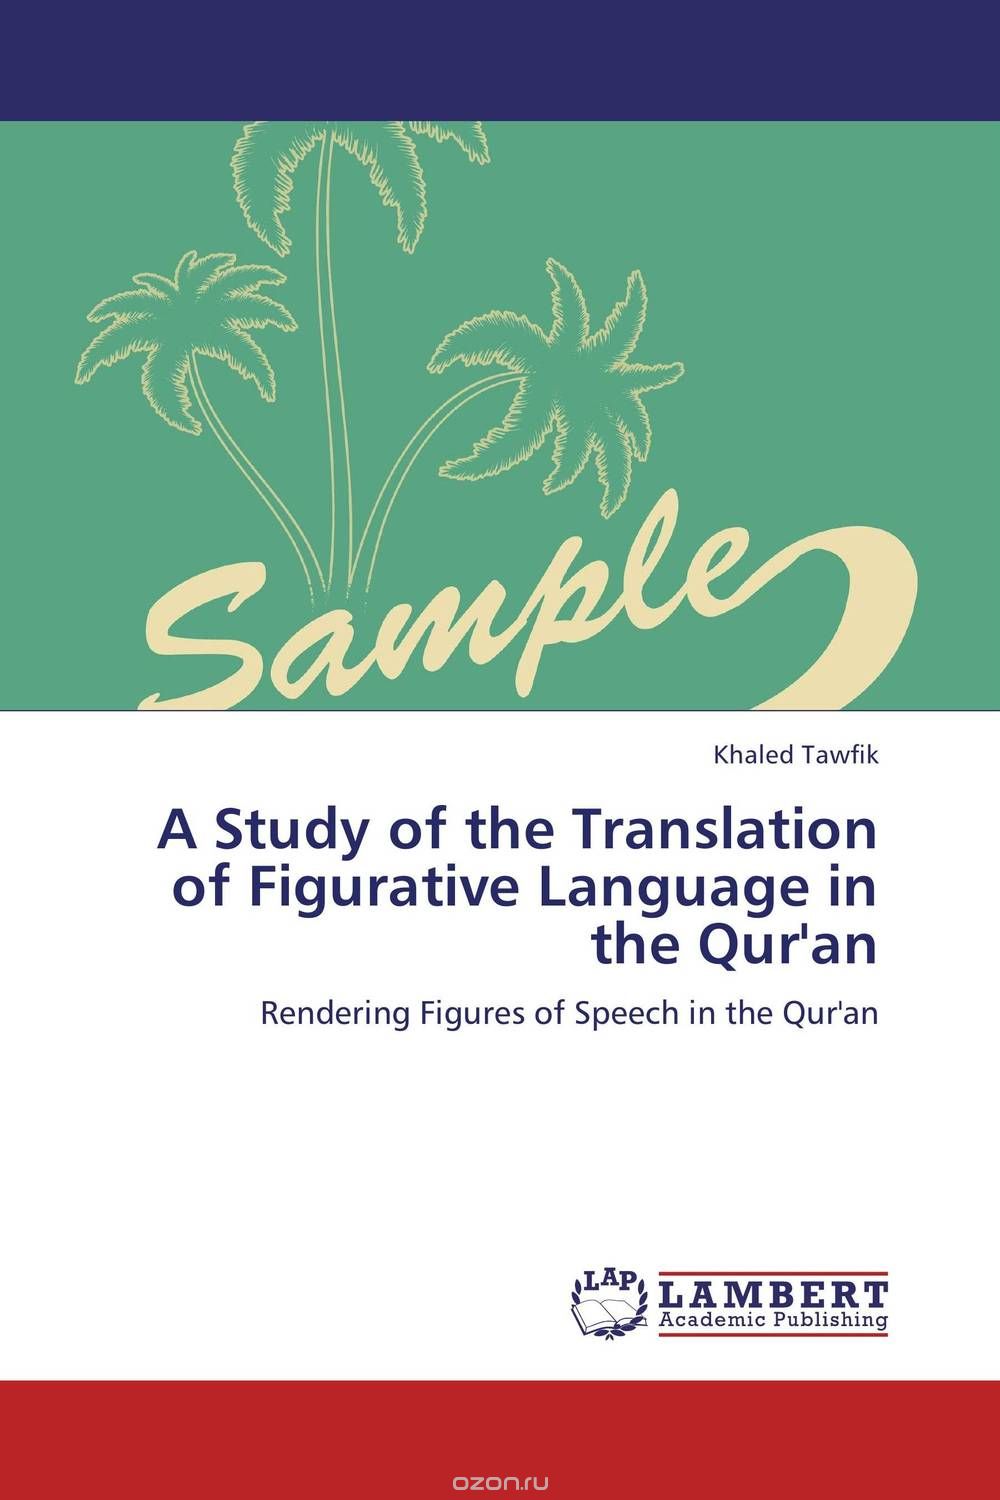 A Study of the Translation of Figurative Language in the Qur'an